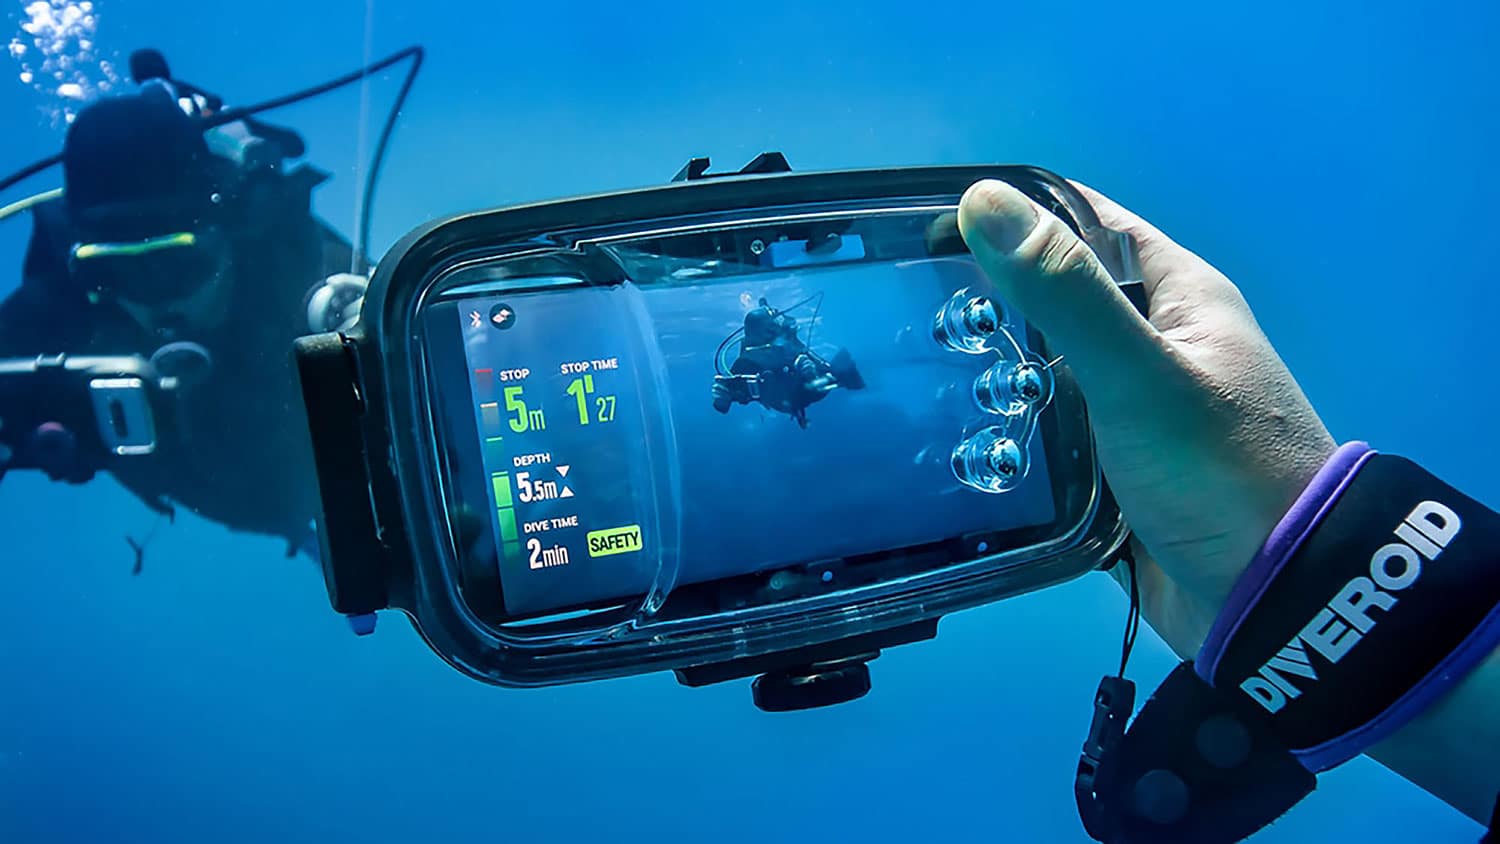 DIVEROID, Turn your smartphone into an All-in-one Dive gear.